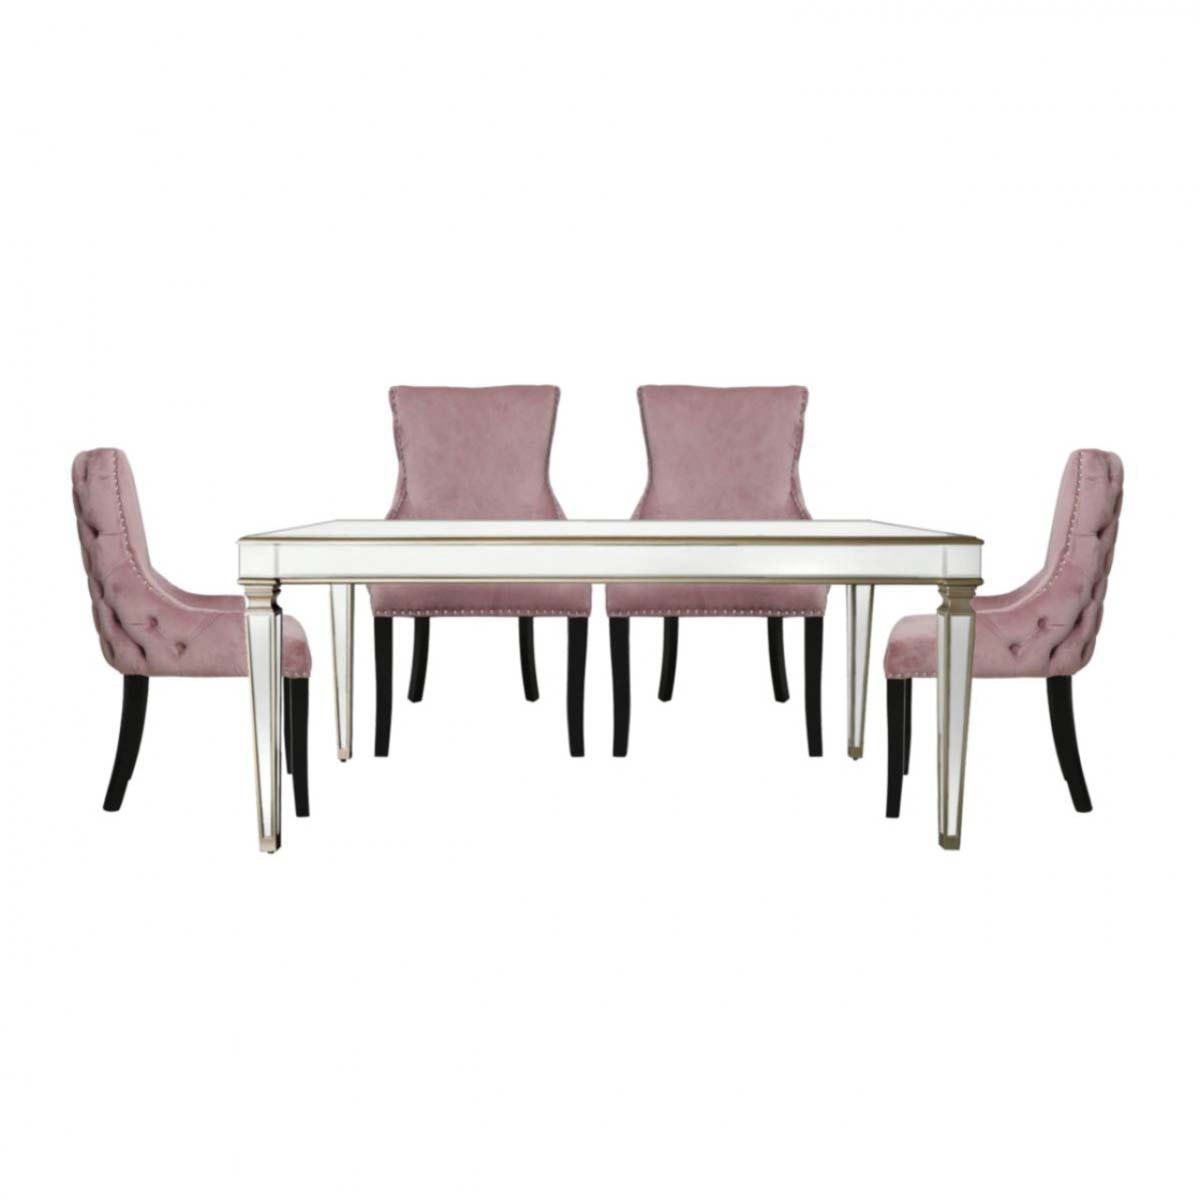 Andreas Champagne Trim Mirrored 5 Piece Set - Pink Chairs